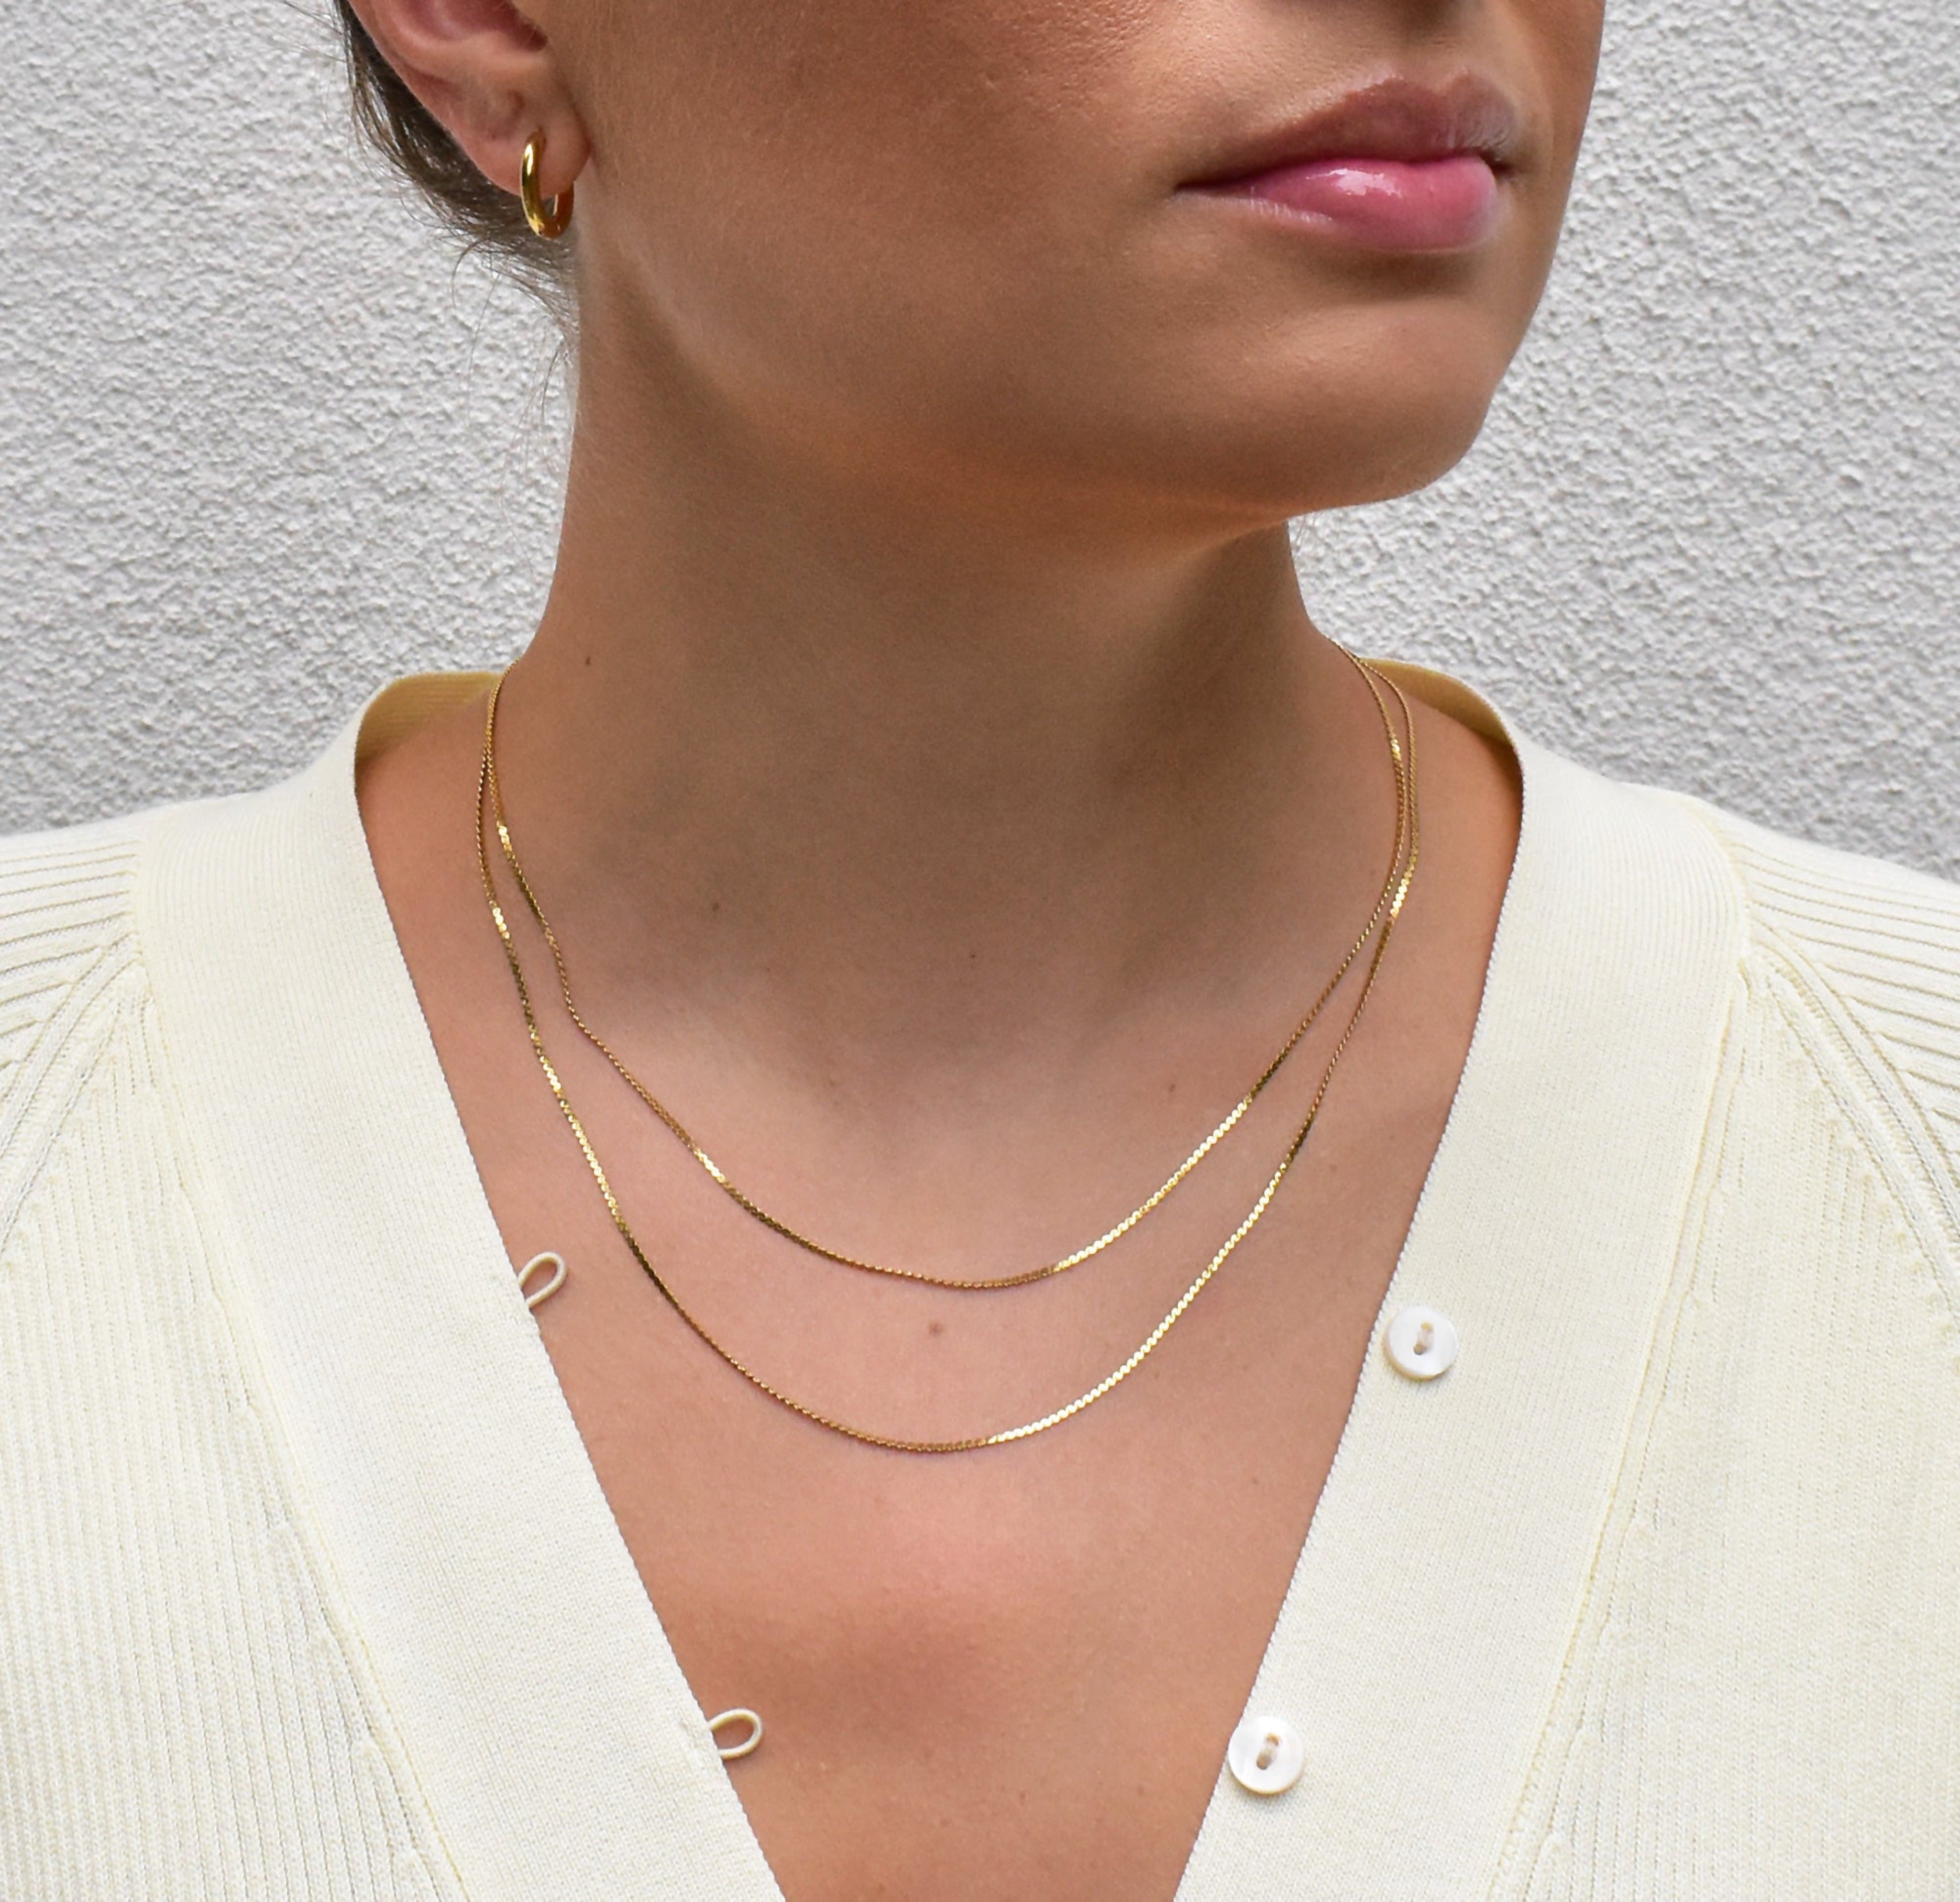 dainty gold chain necklace waterproof jewelry